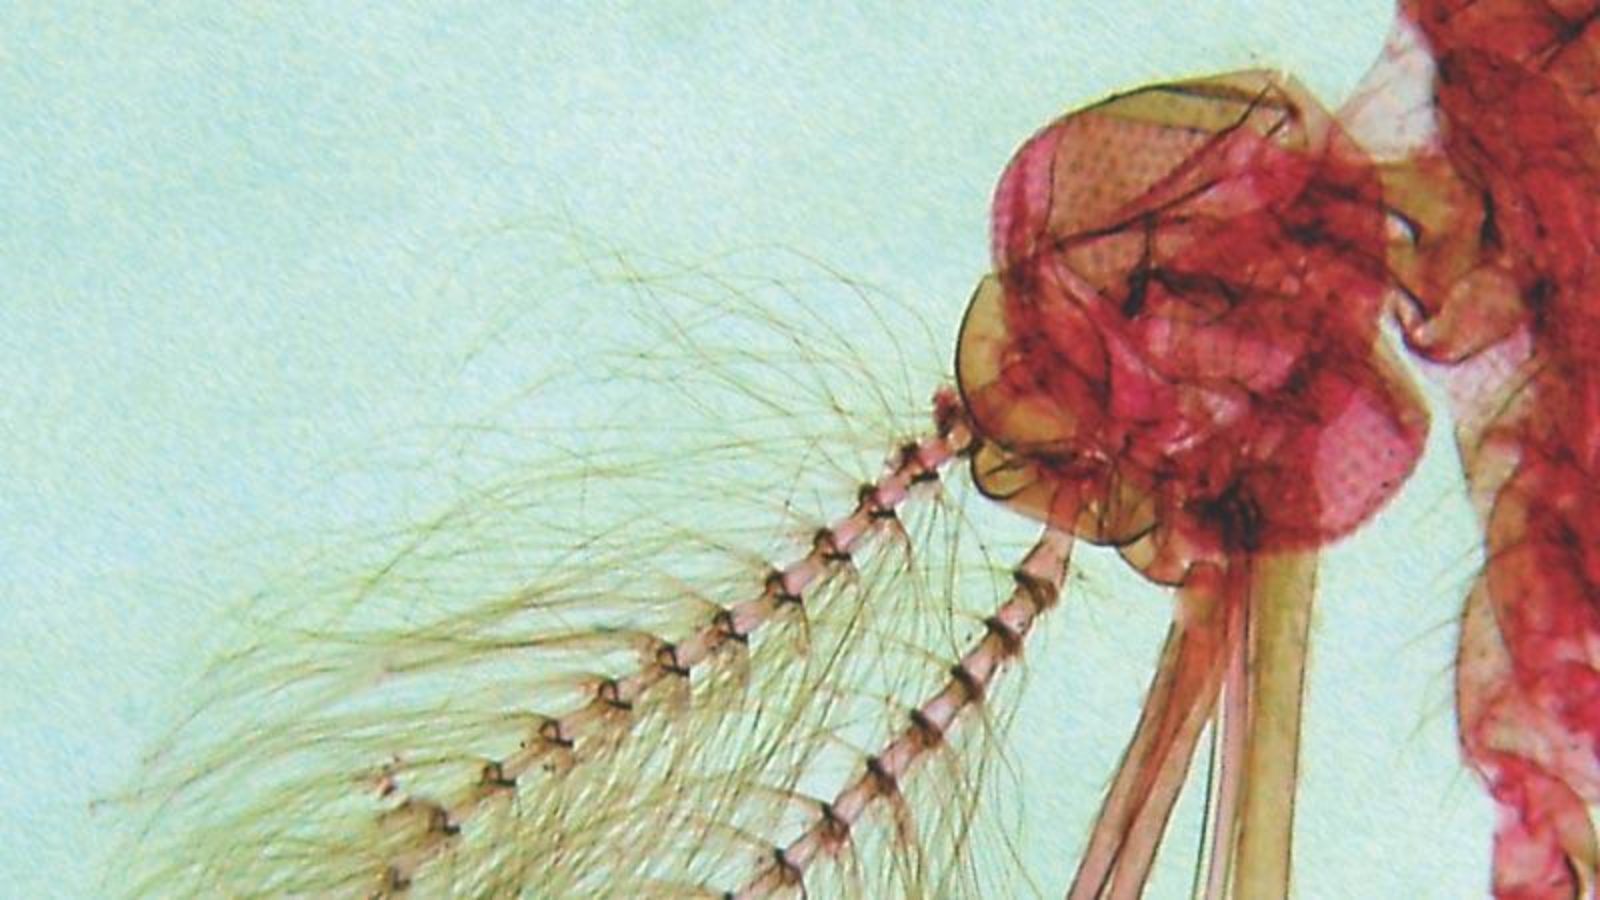 Magnified image of male mosquito head Credit Peter Barnard